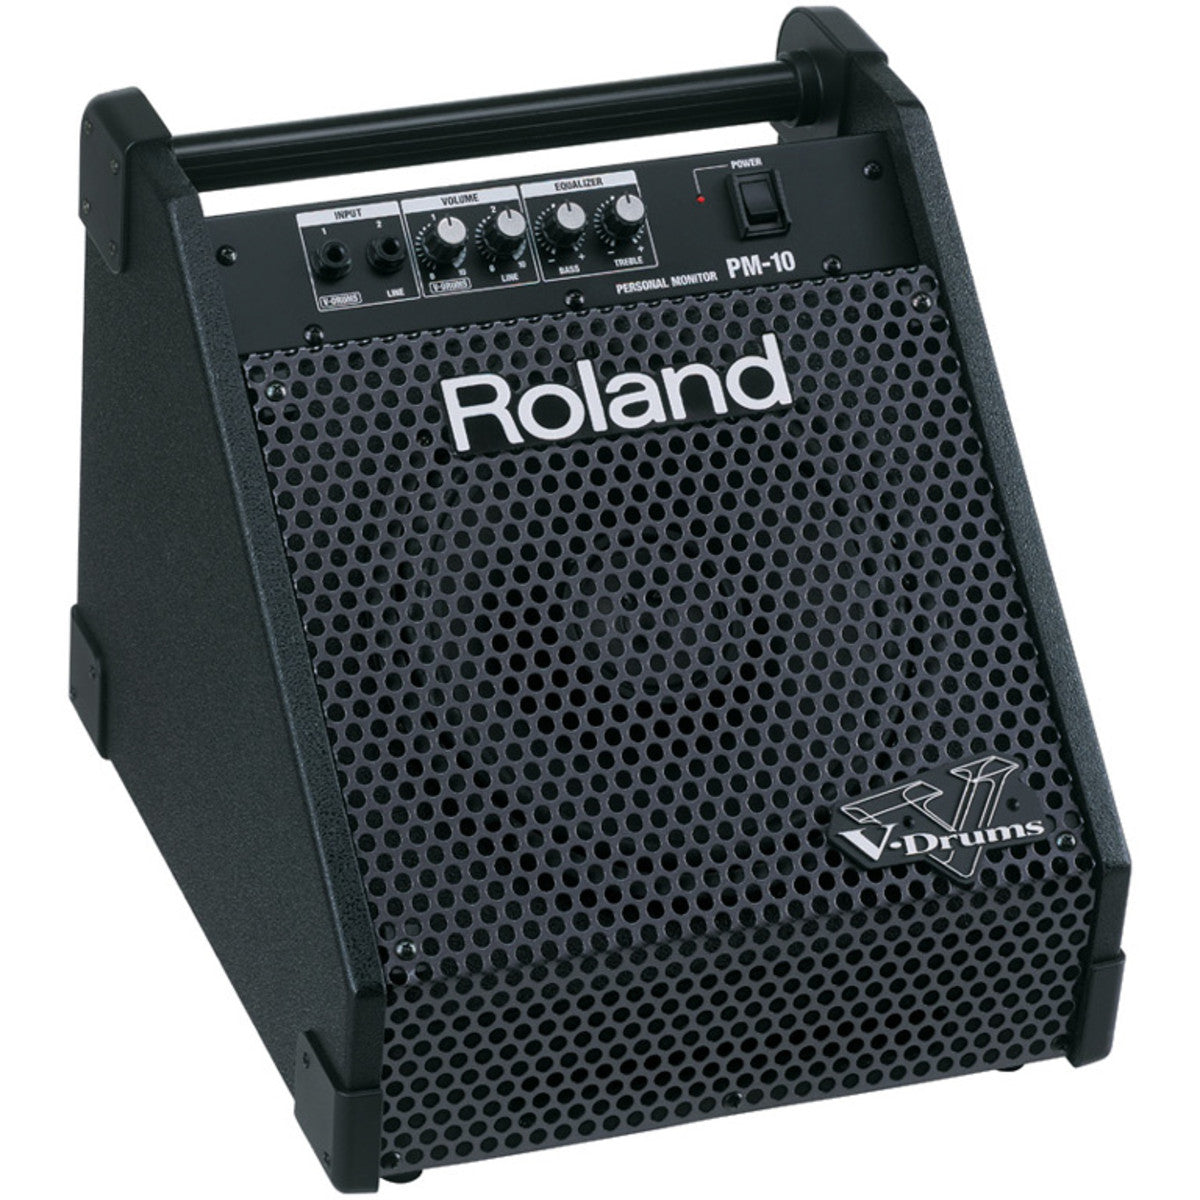 Amplifier Percussion Combo Roland PM-10-Mai Nguyên Music